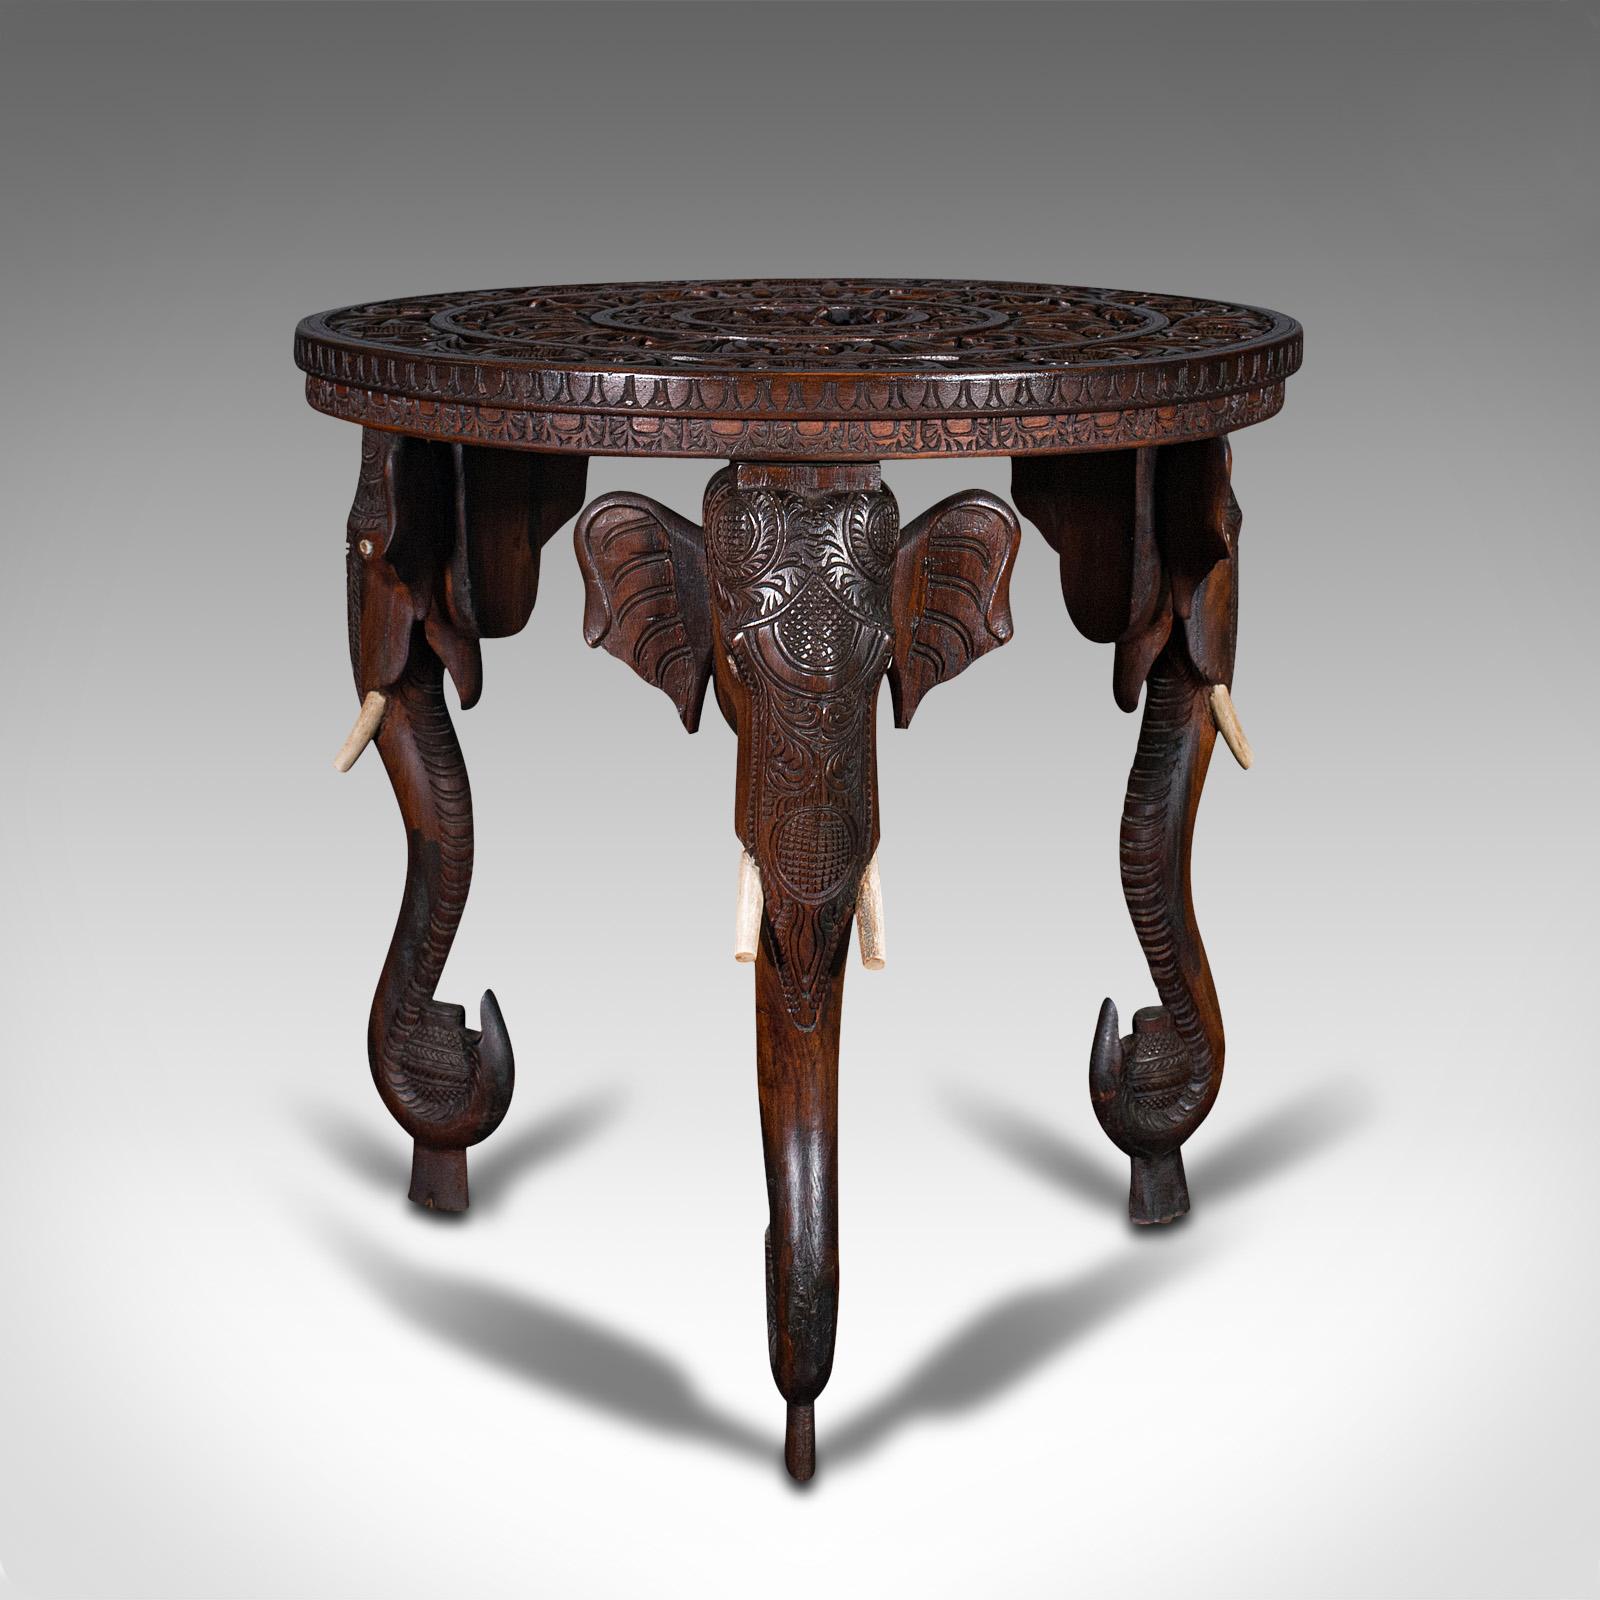 This is an antique carved circular table. An Indian, teak colonial campaign table with elephant masques, dating to the late Victorian period, circa 1900.

Enthusiastically carved table with charming legs
Displays a desirable aged patina